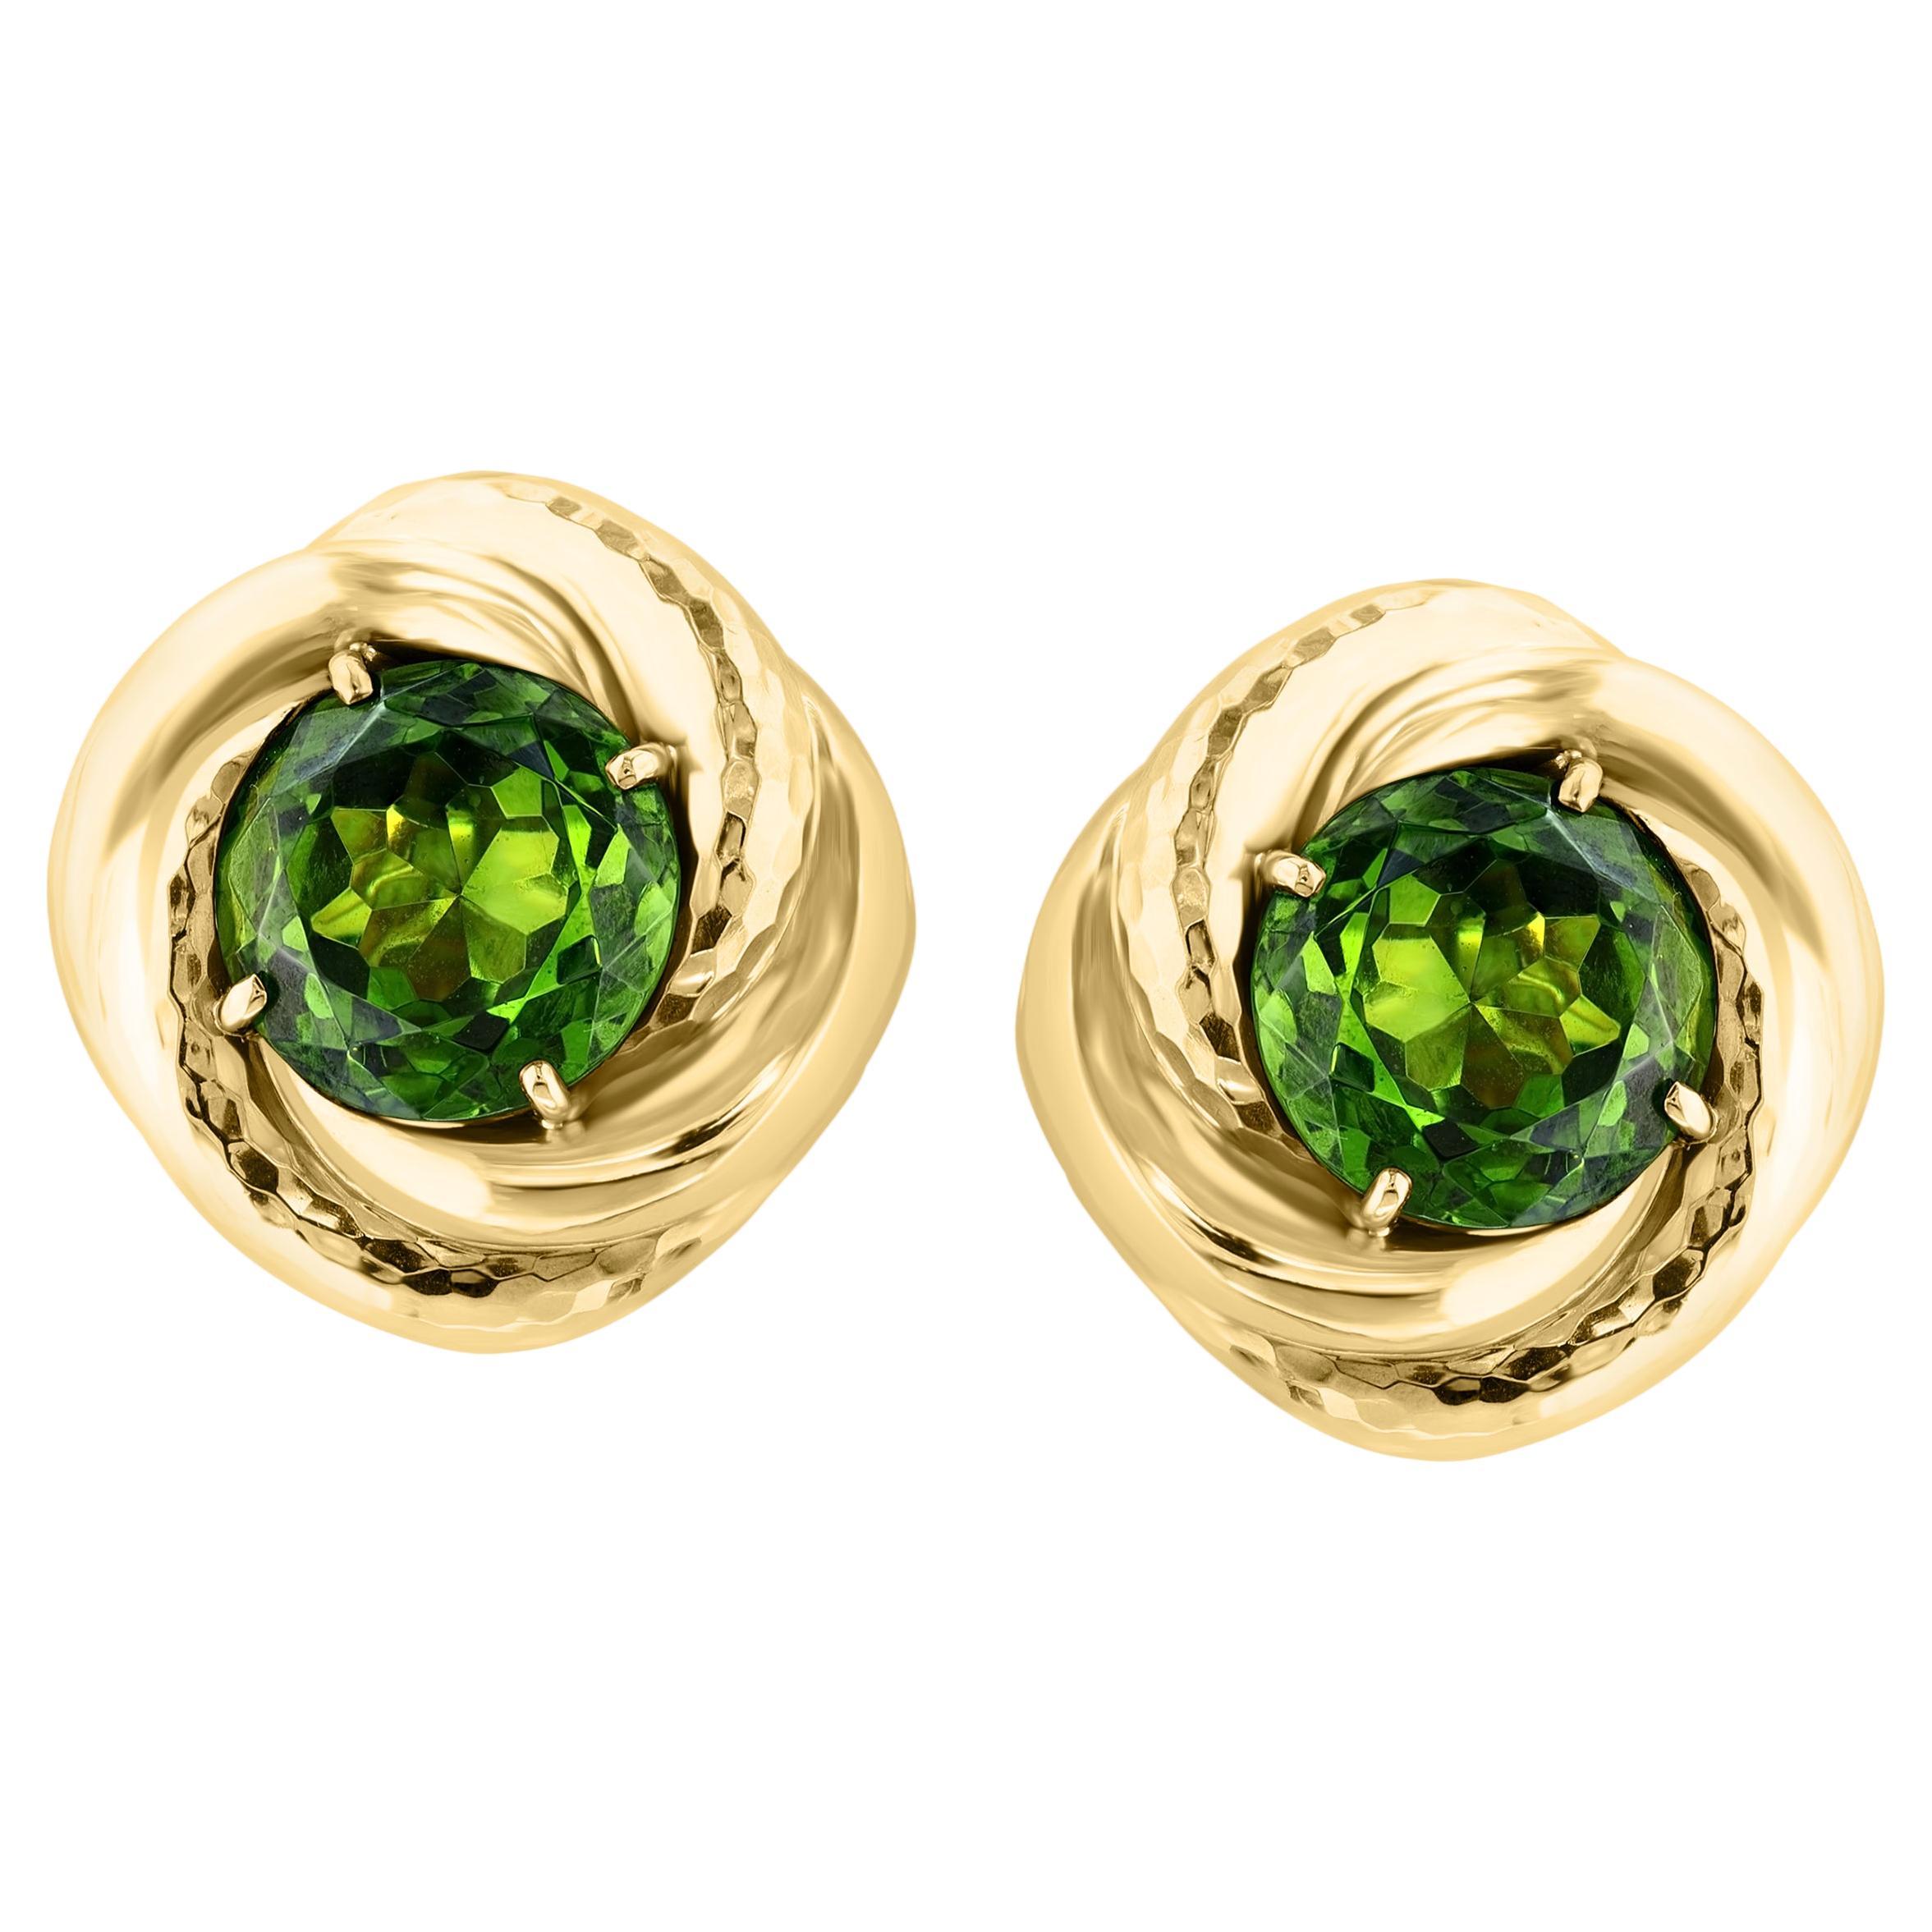 30Ct Natural Round Peridot Earrings by Andrew Clunn in 18 Kt Hammered Gold, Clip For Sale